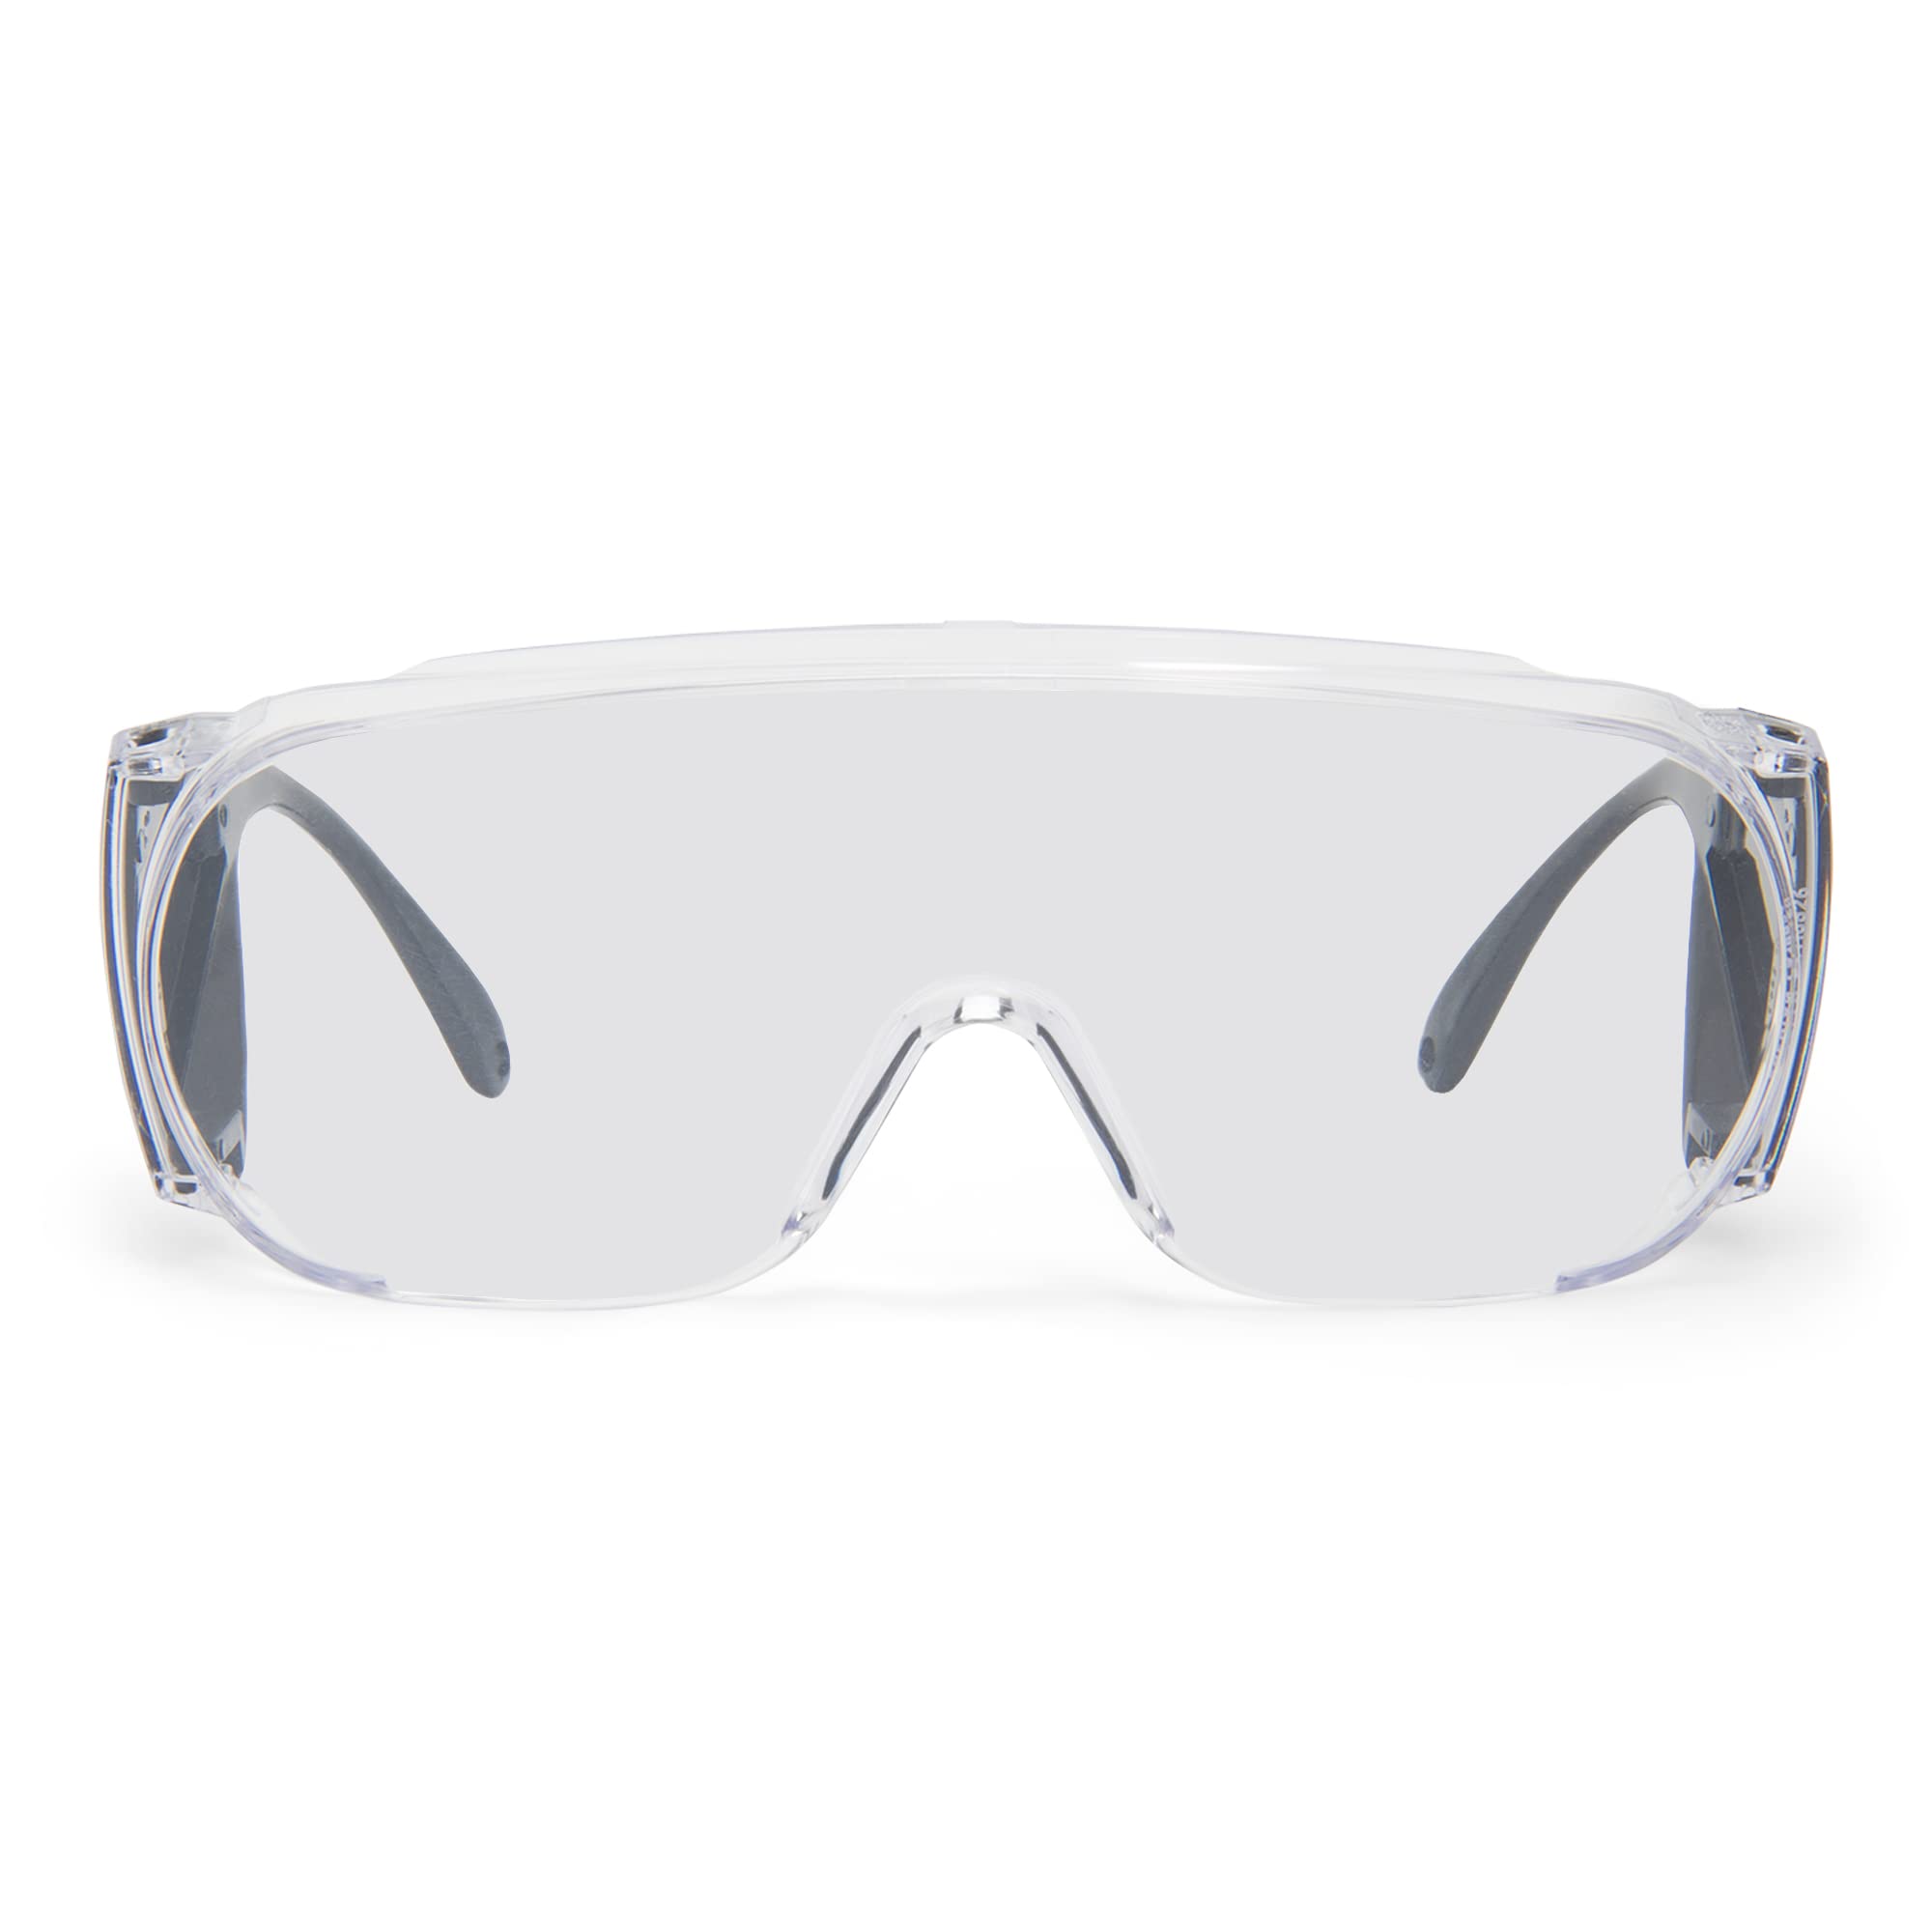 RWS-51135 Clear Safety Glasses